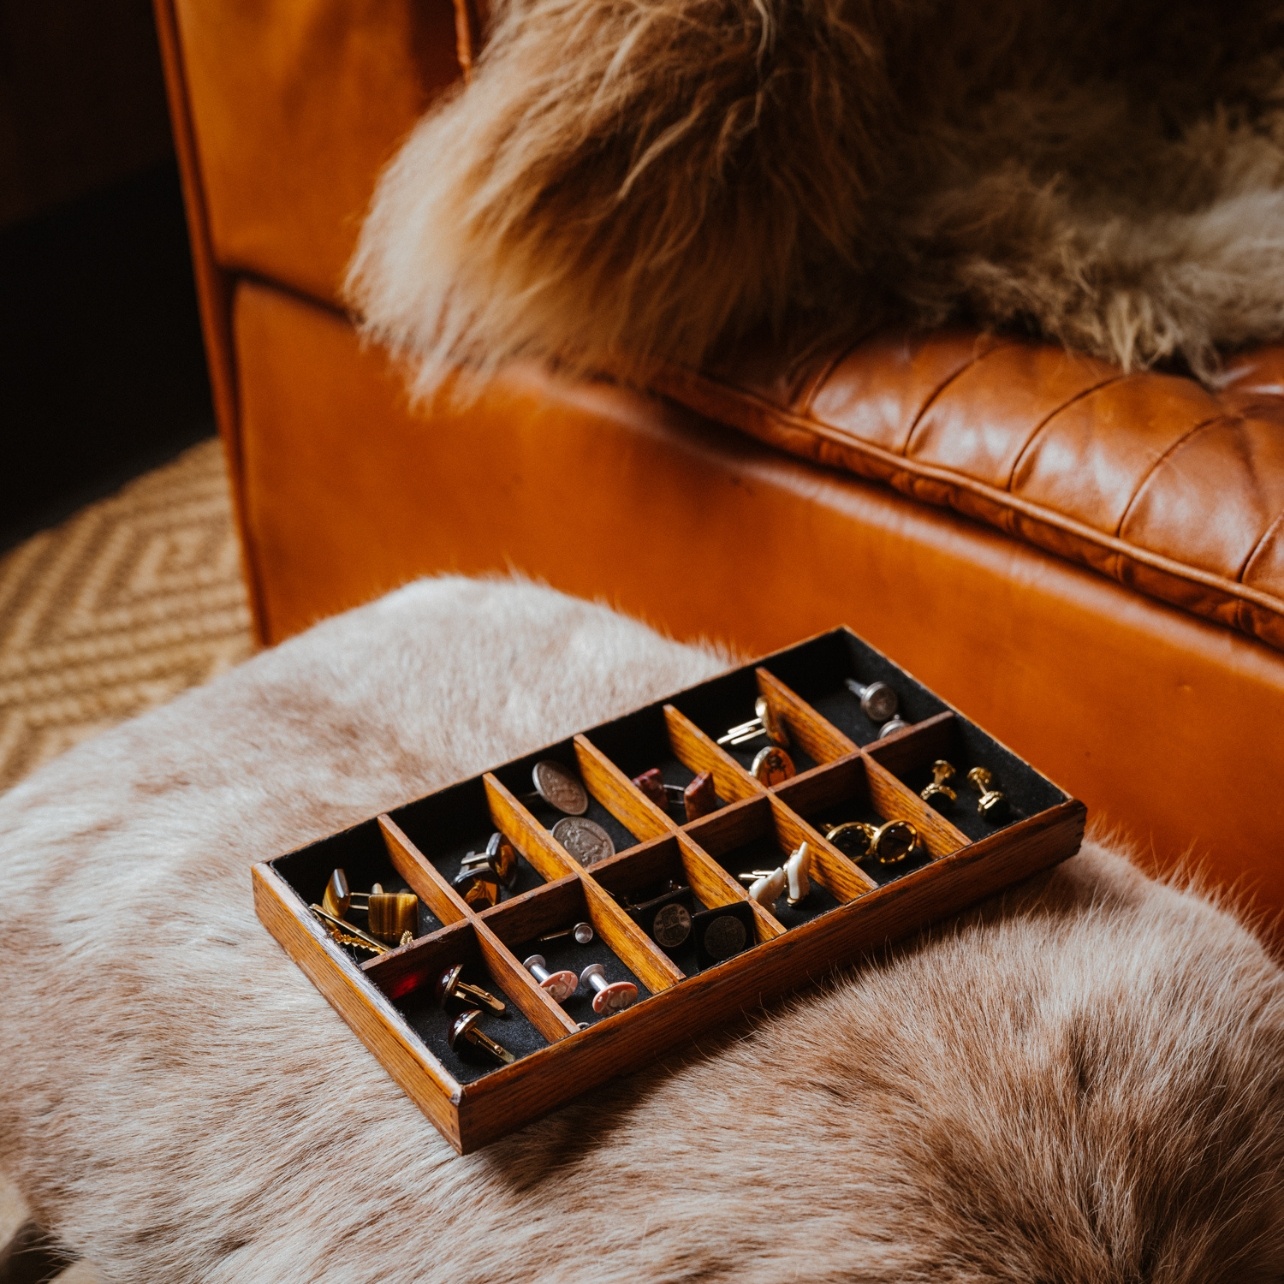 Wooden case filled with an assortment of cufflinks collected by Ken Fulk